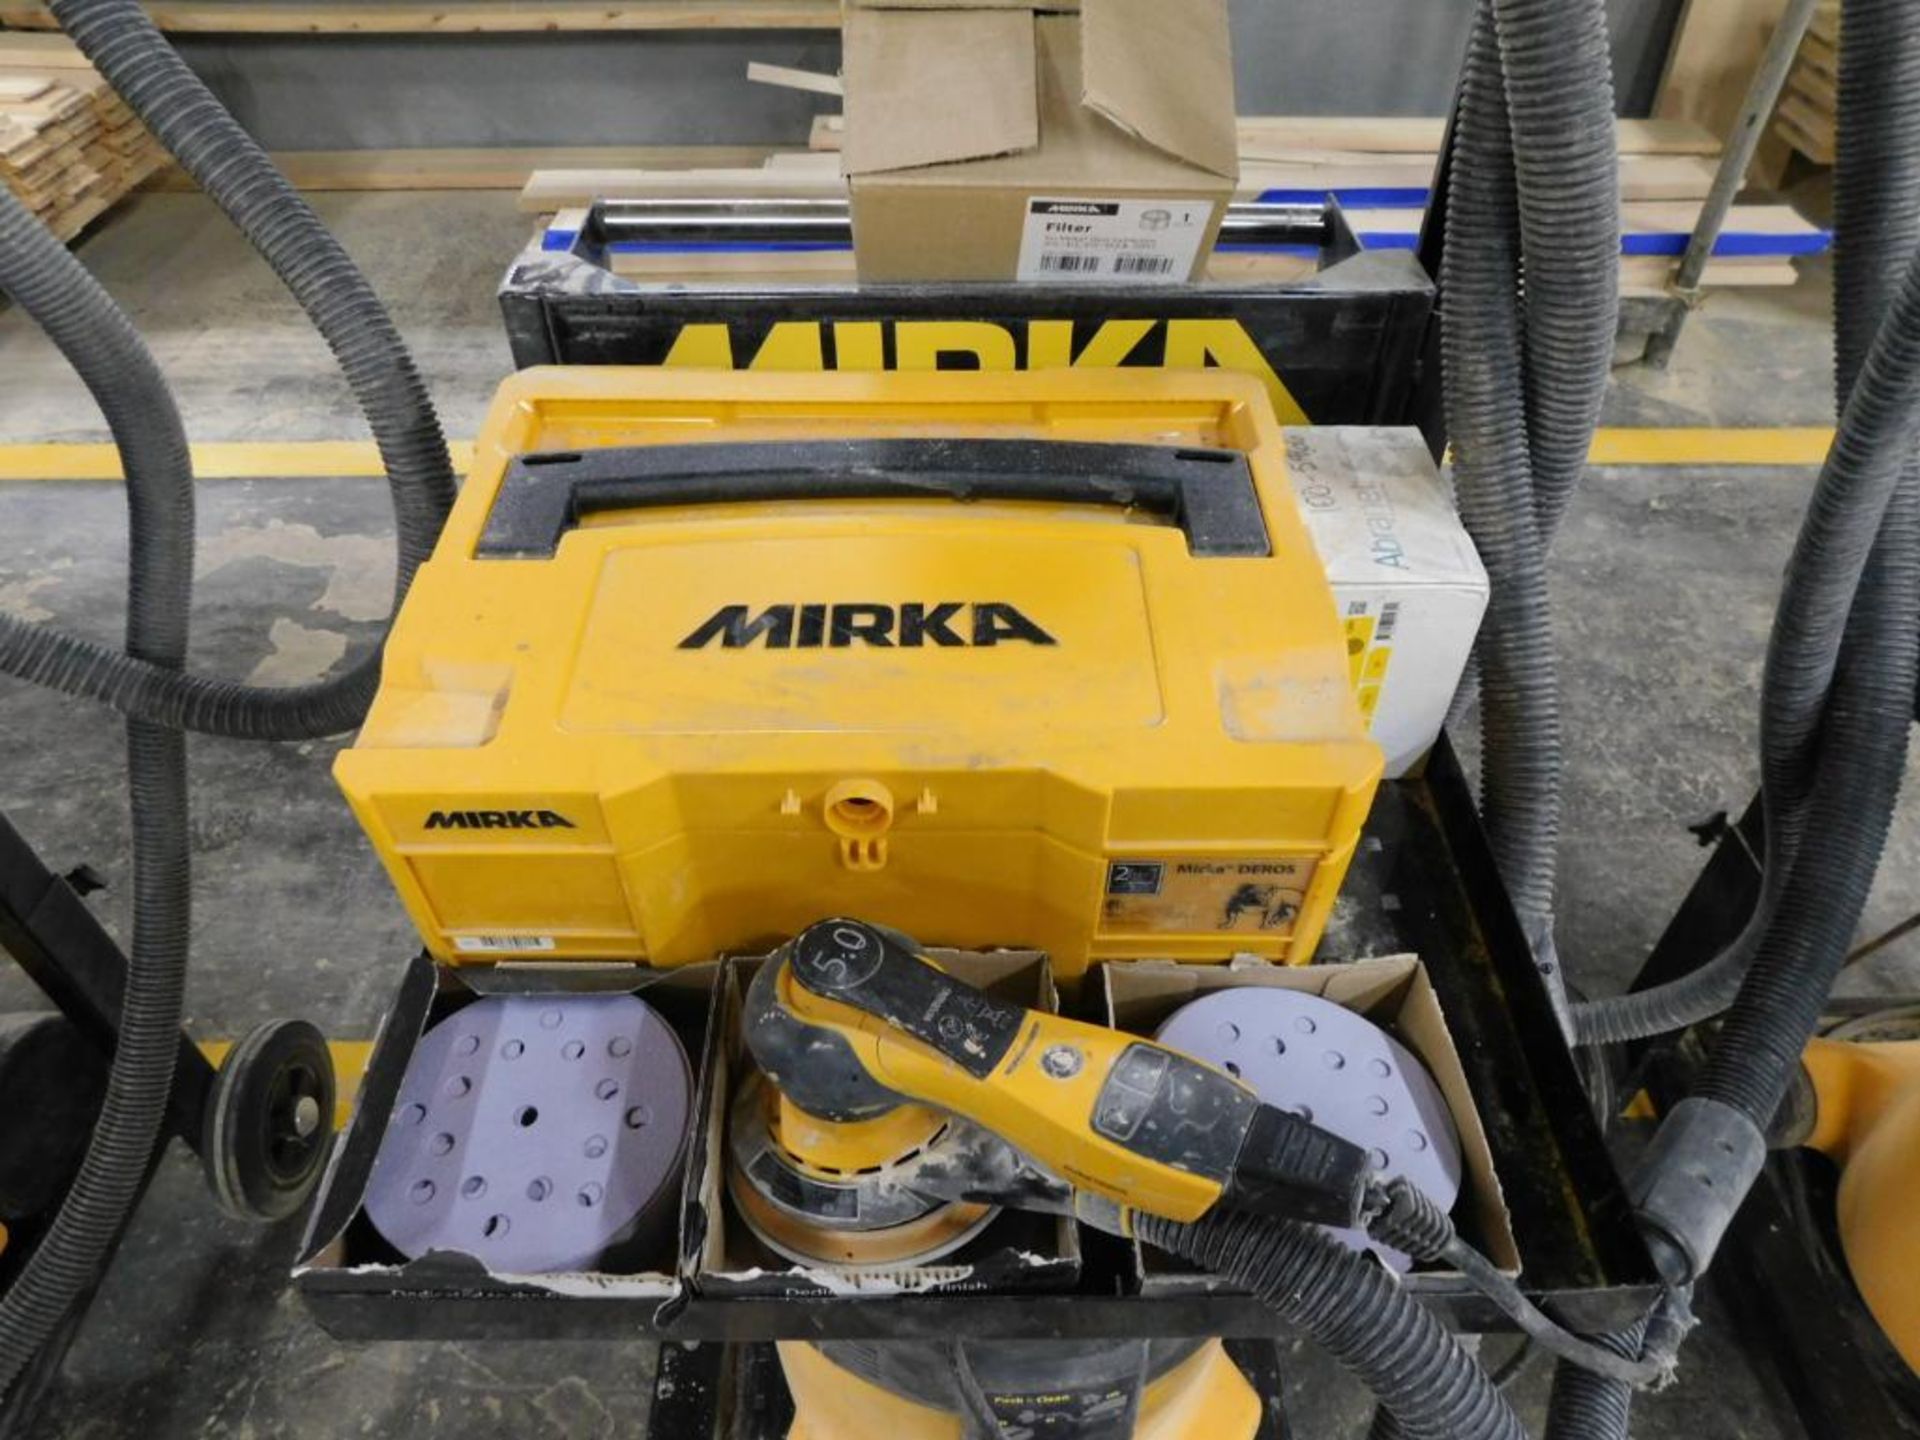 Mirka Deros Dust Free Sanding System, Pneumatic Palm Sander with Portable Hepa Dust Collection Syste - Image 4 of 5